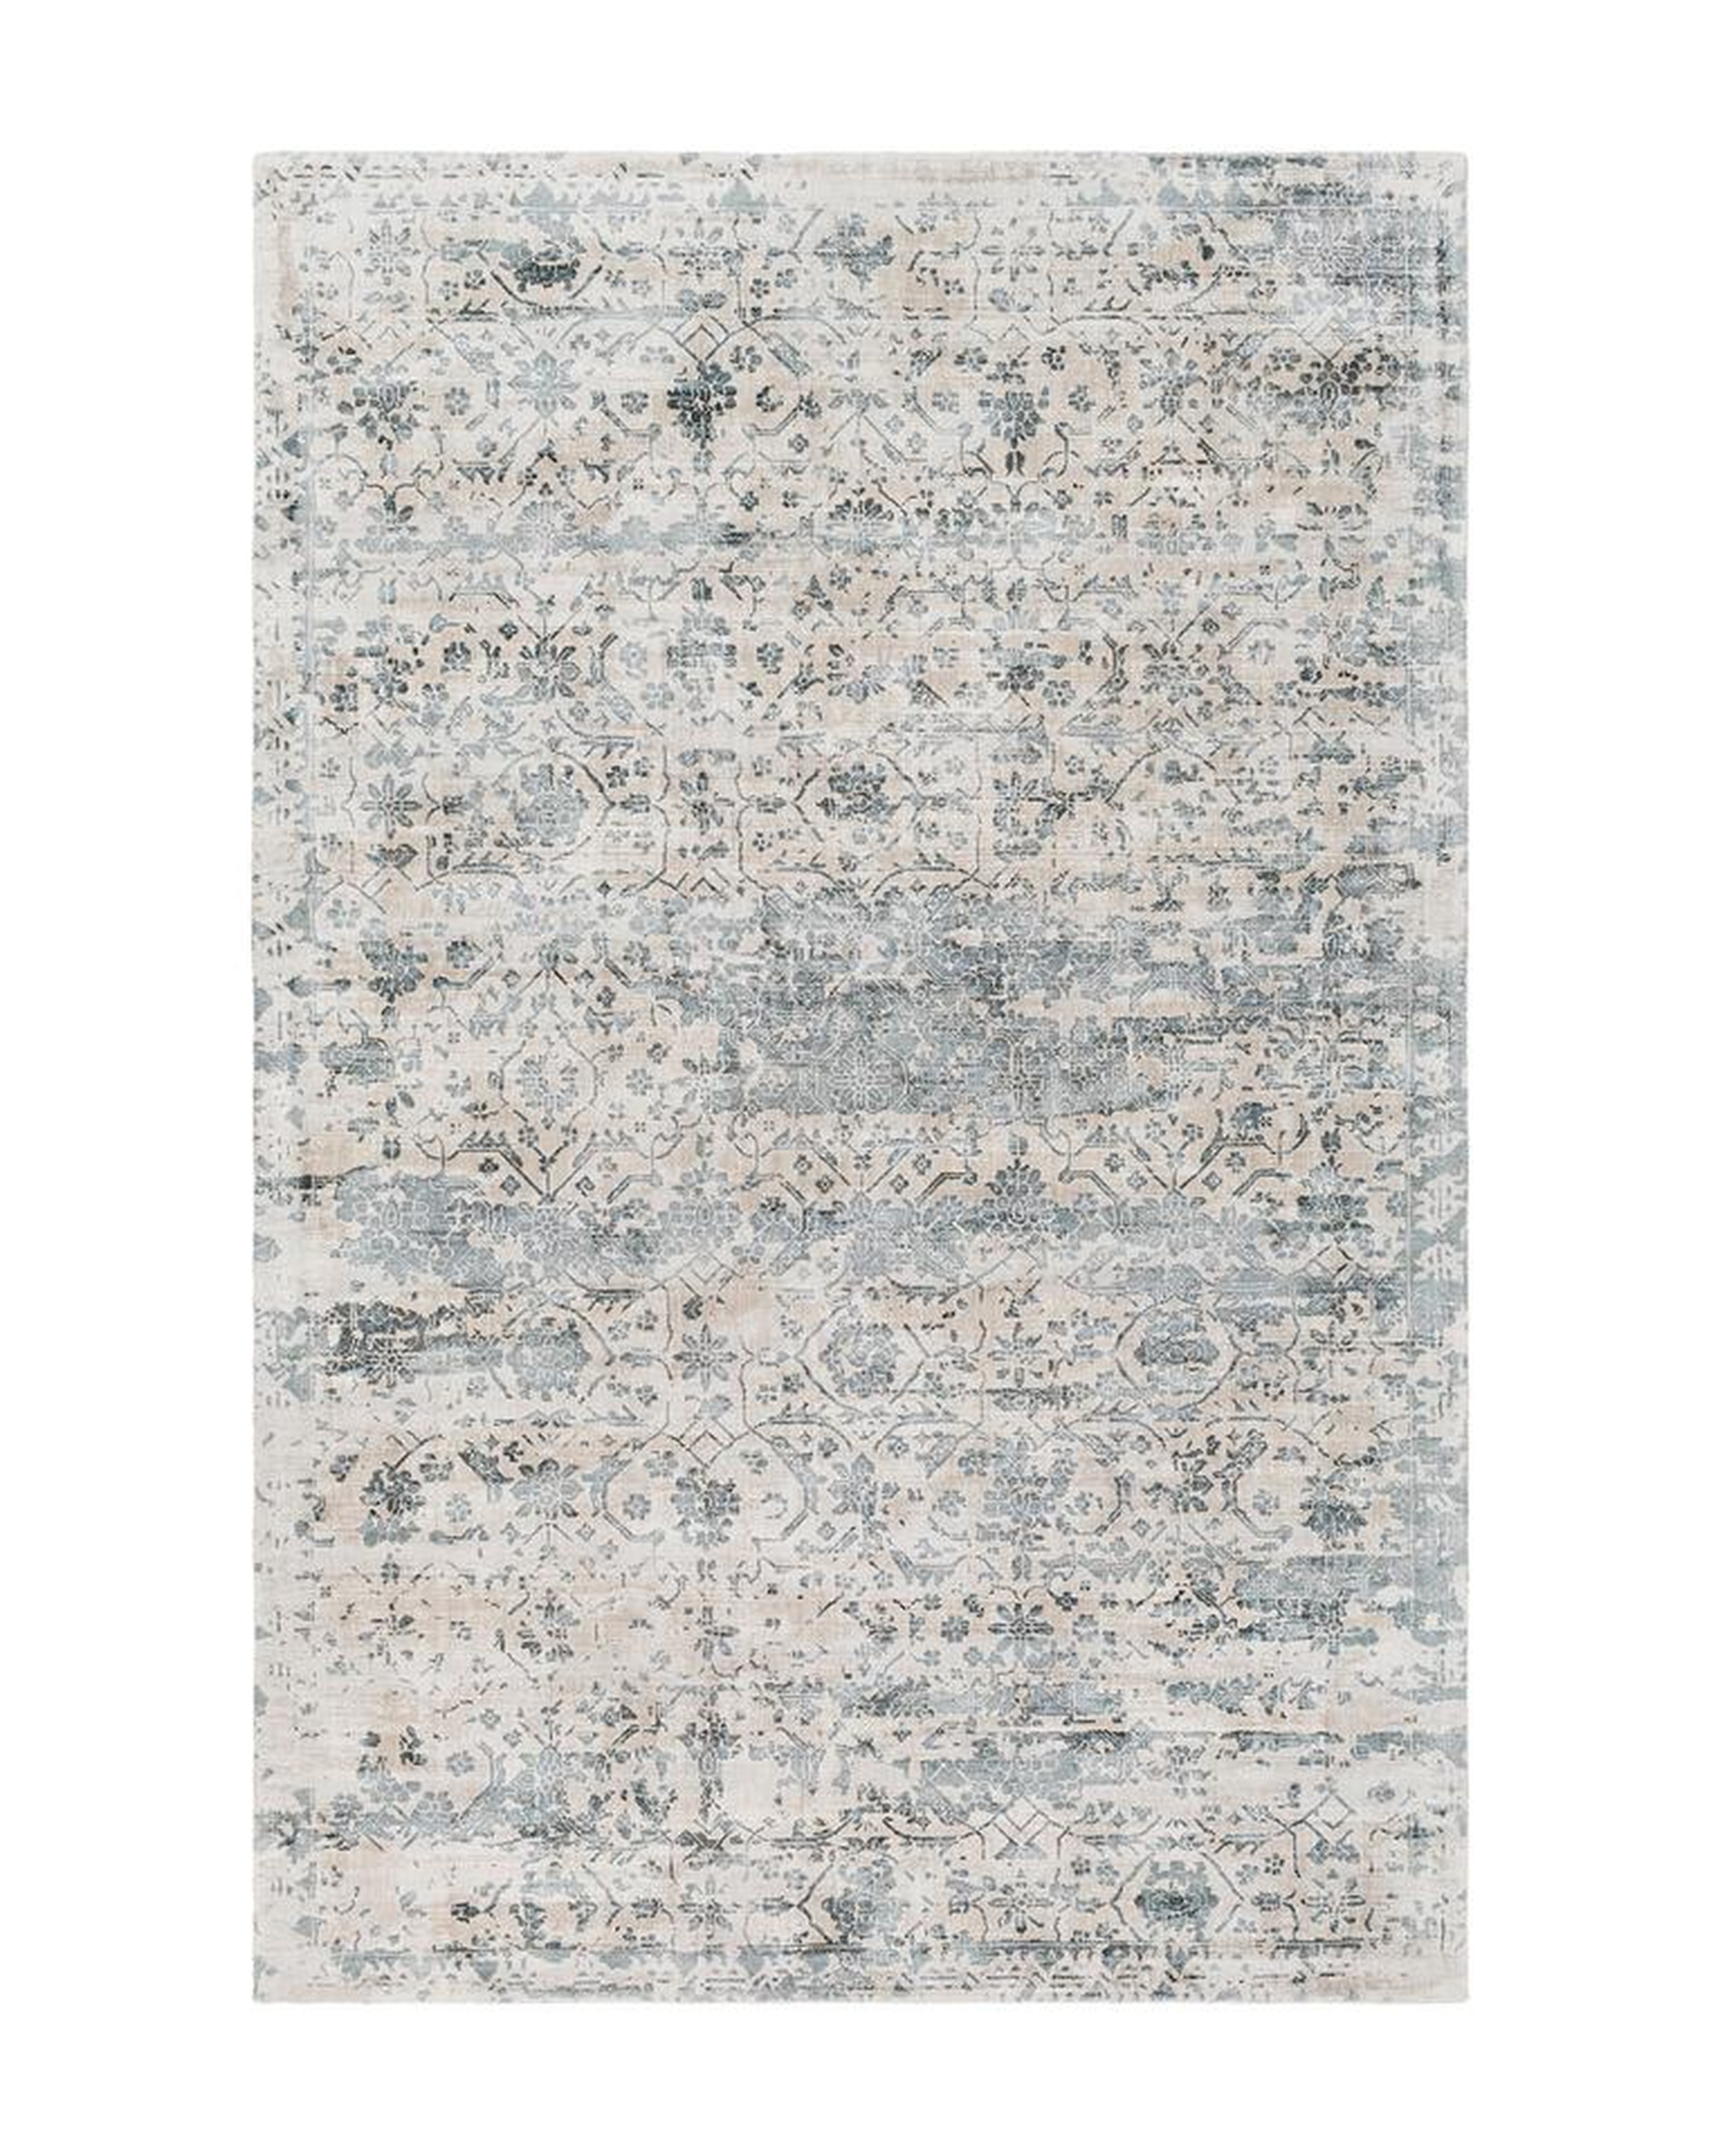 MOSCOW HAND-LOOMED RUG, 8' x 10' - McGee & Co.